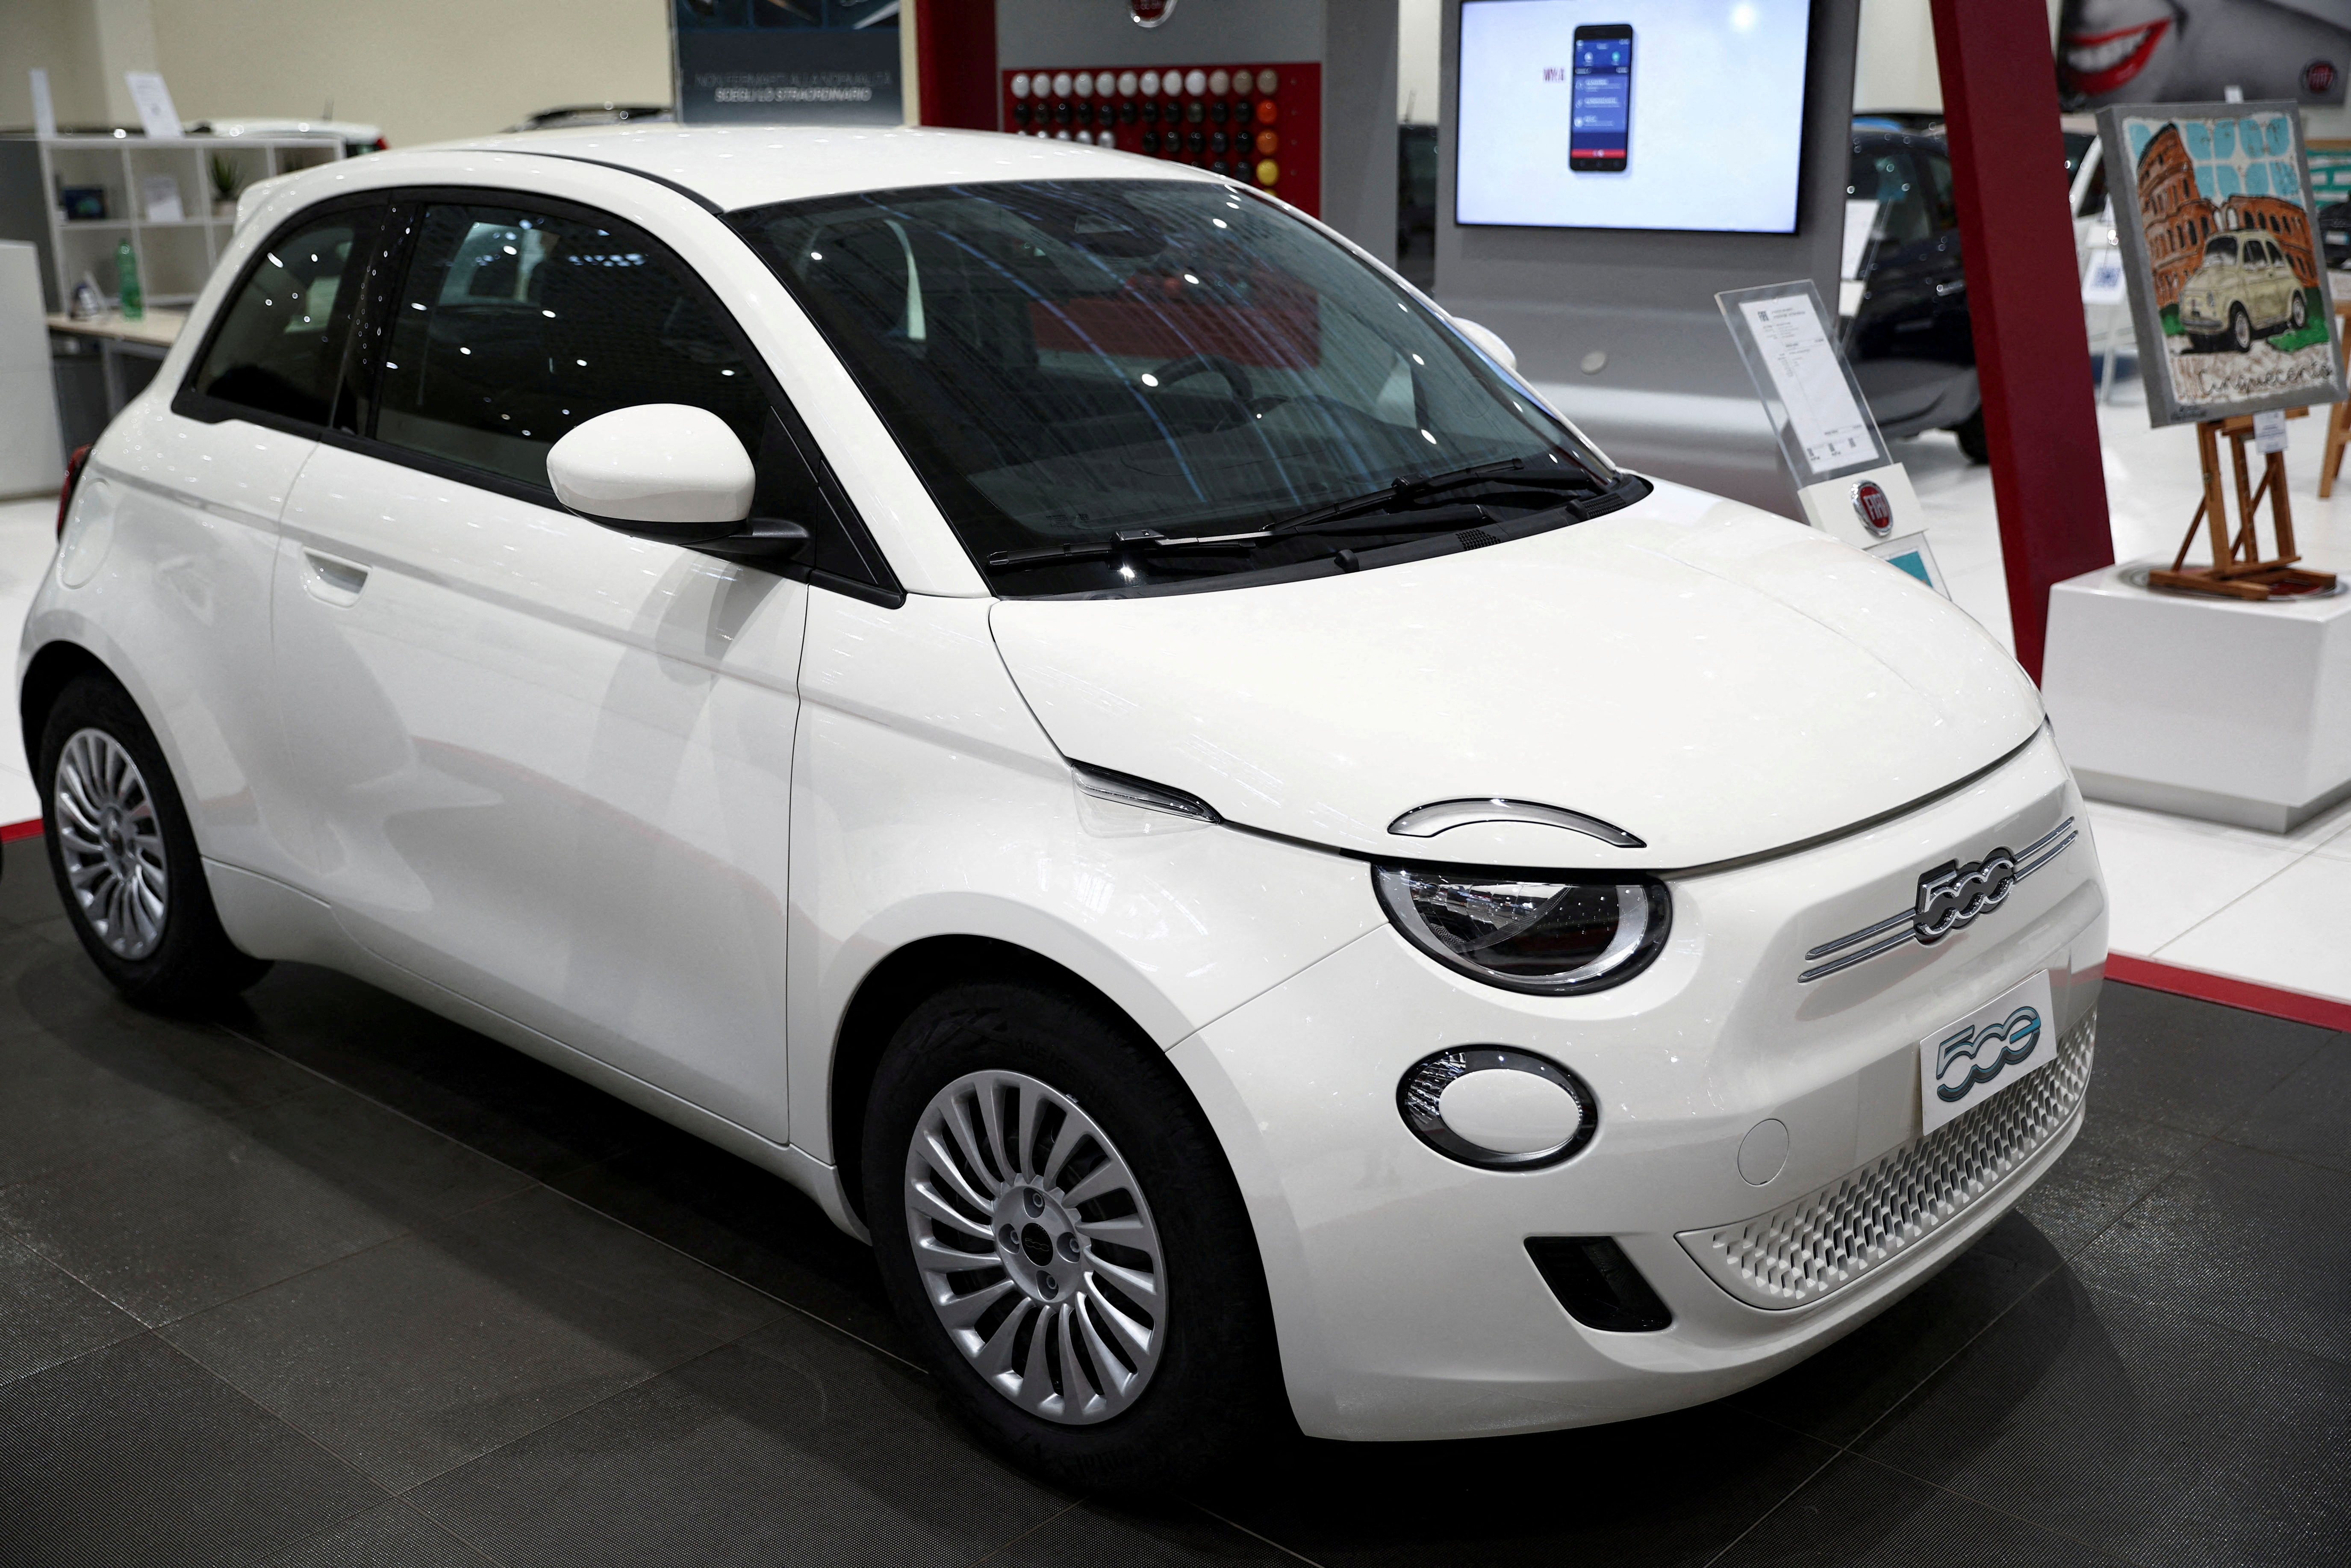 Stellantis says Turin remains home for Fiat's BEV 500